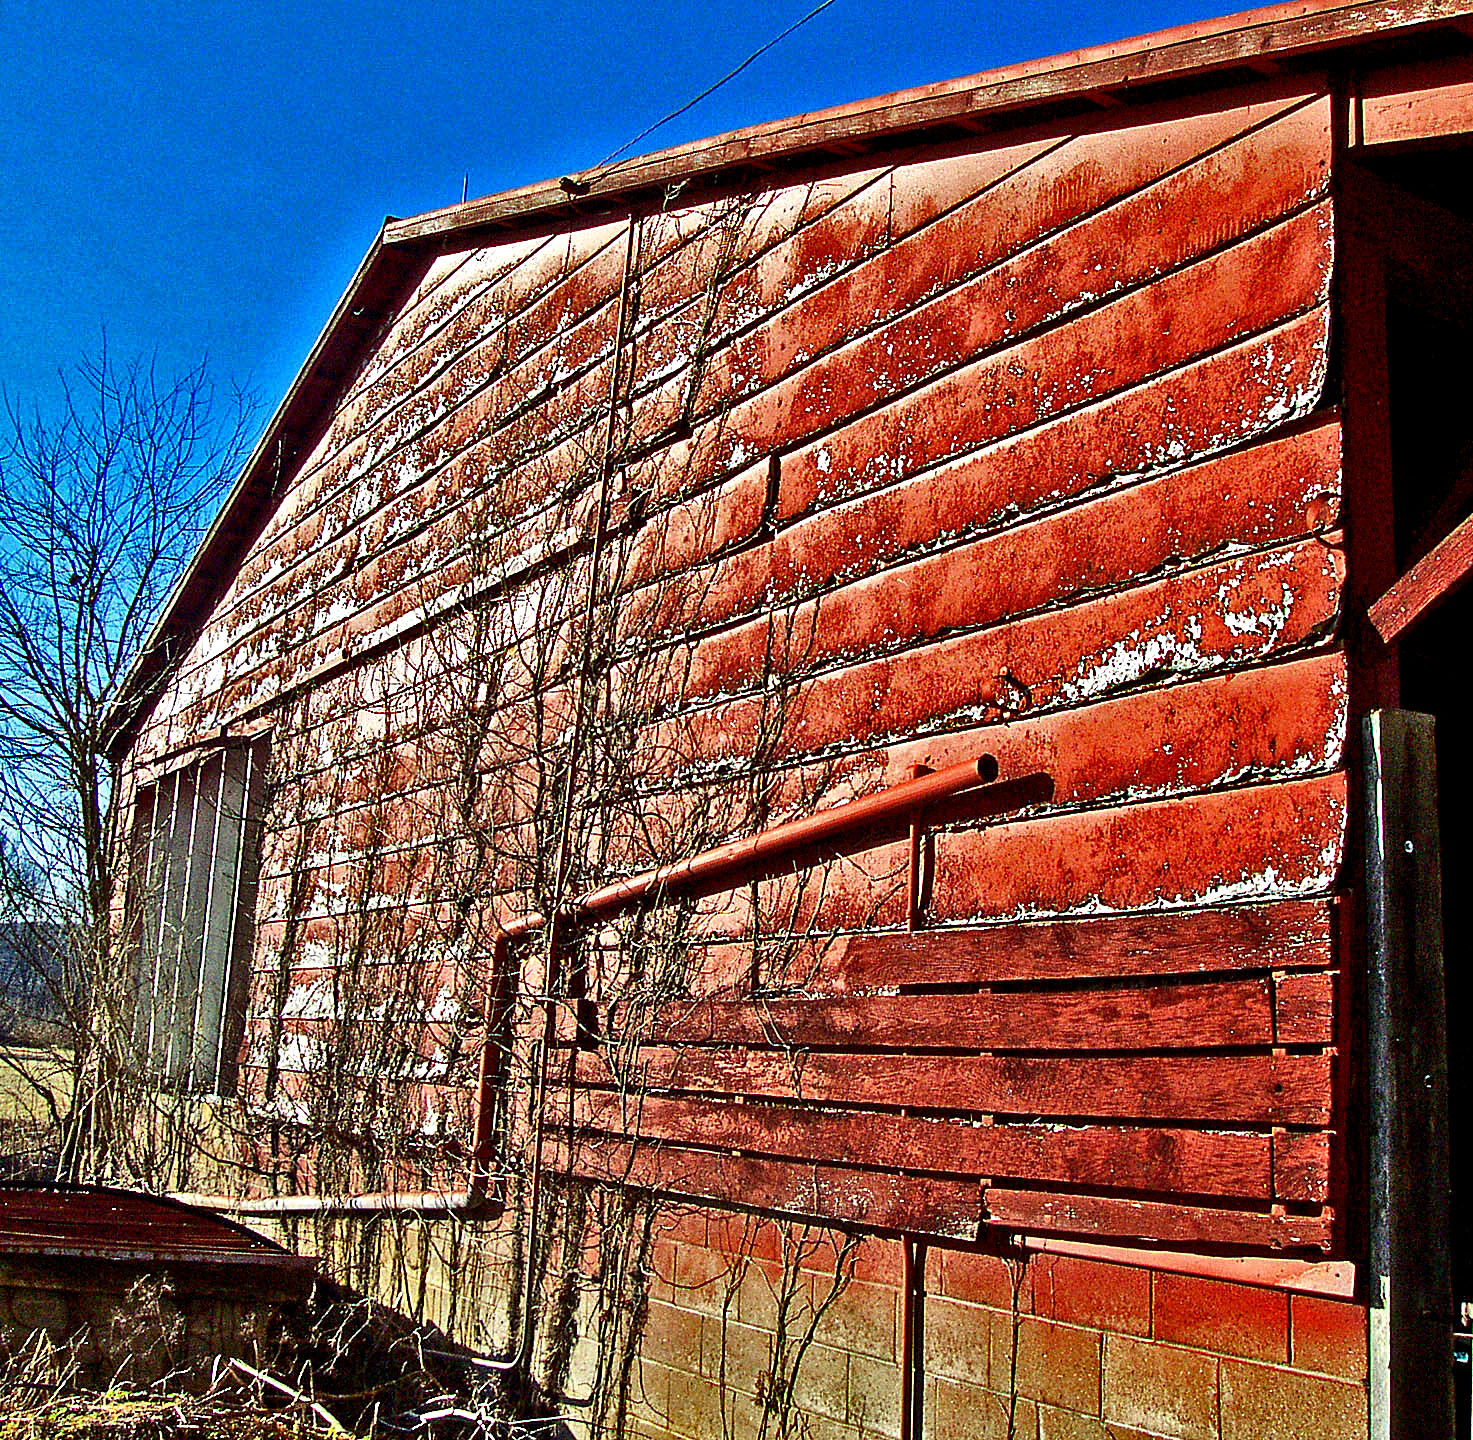 File:Abandoned Cattle Shed (98209840).jpg - Wikimedia Commons